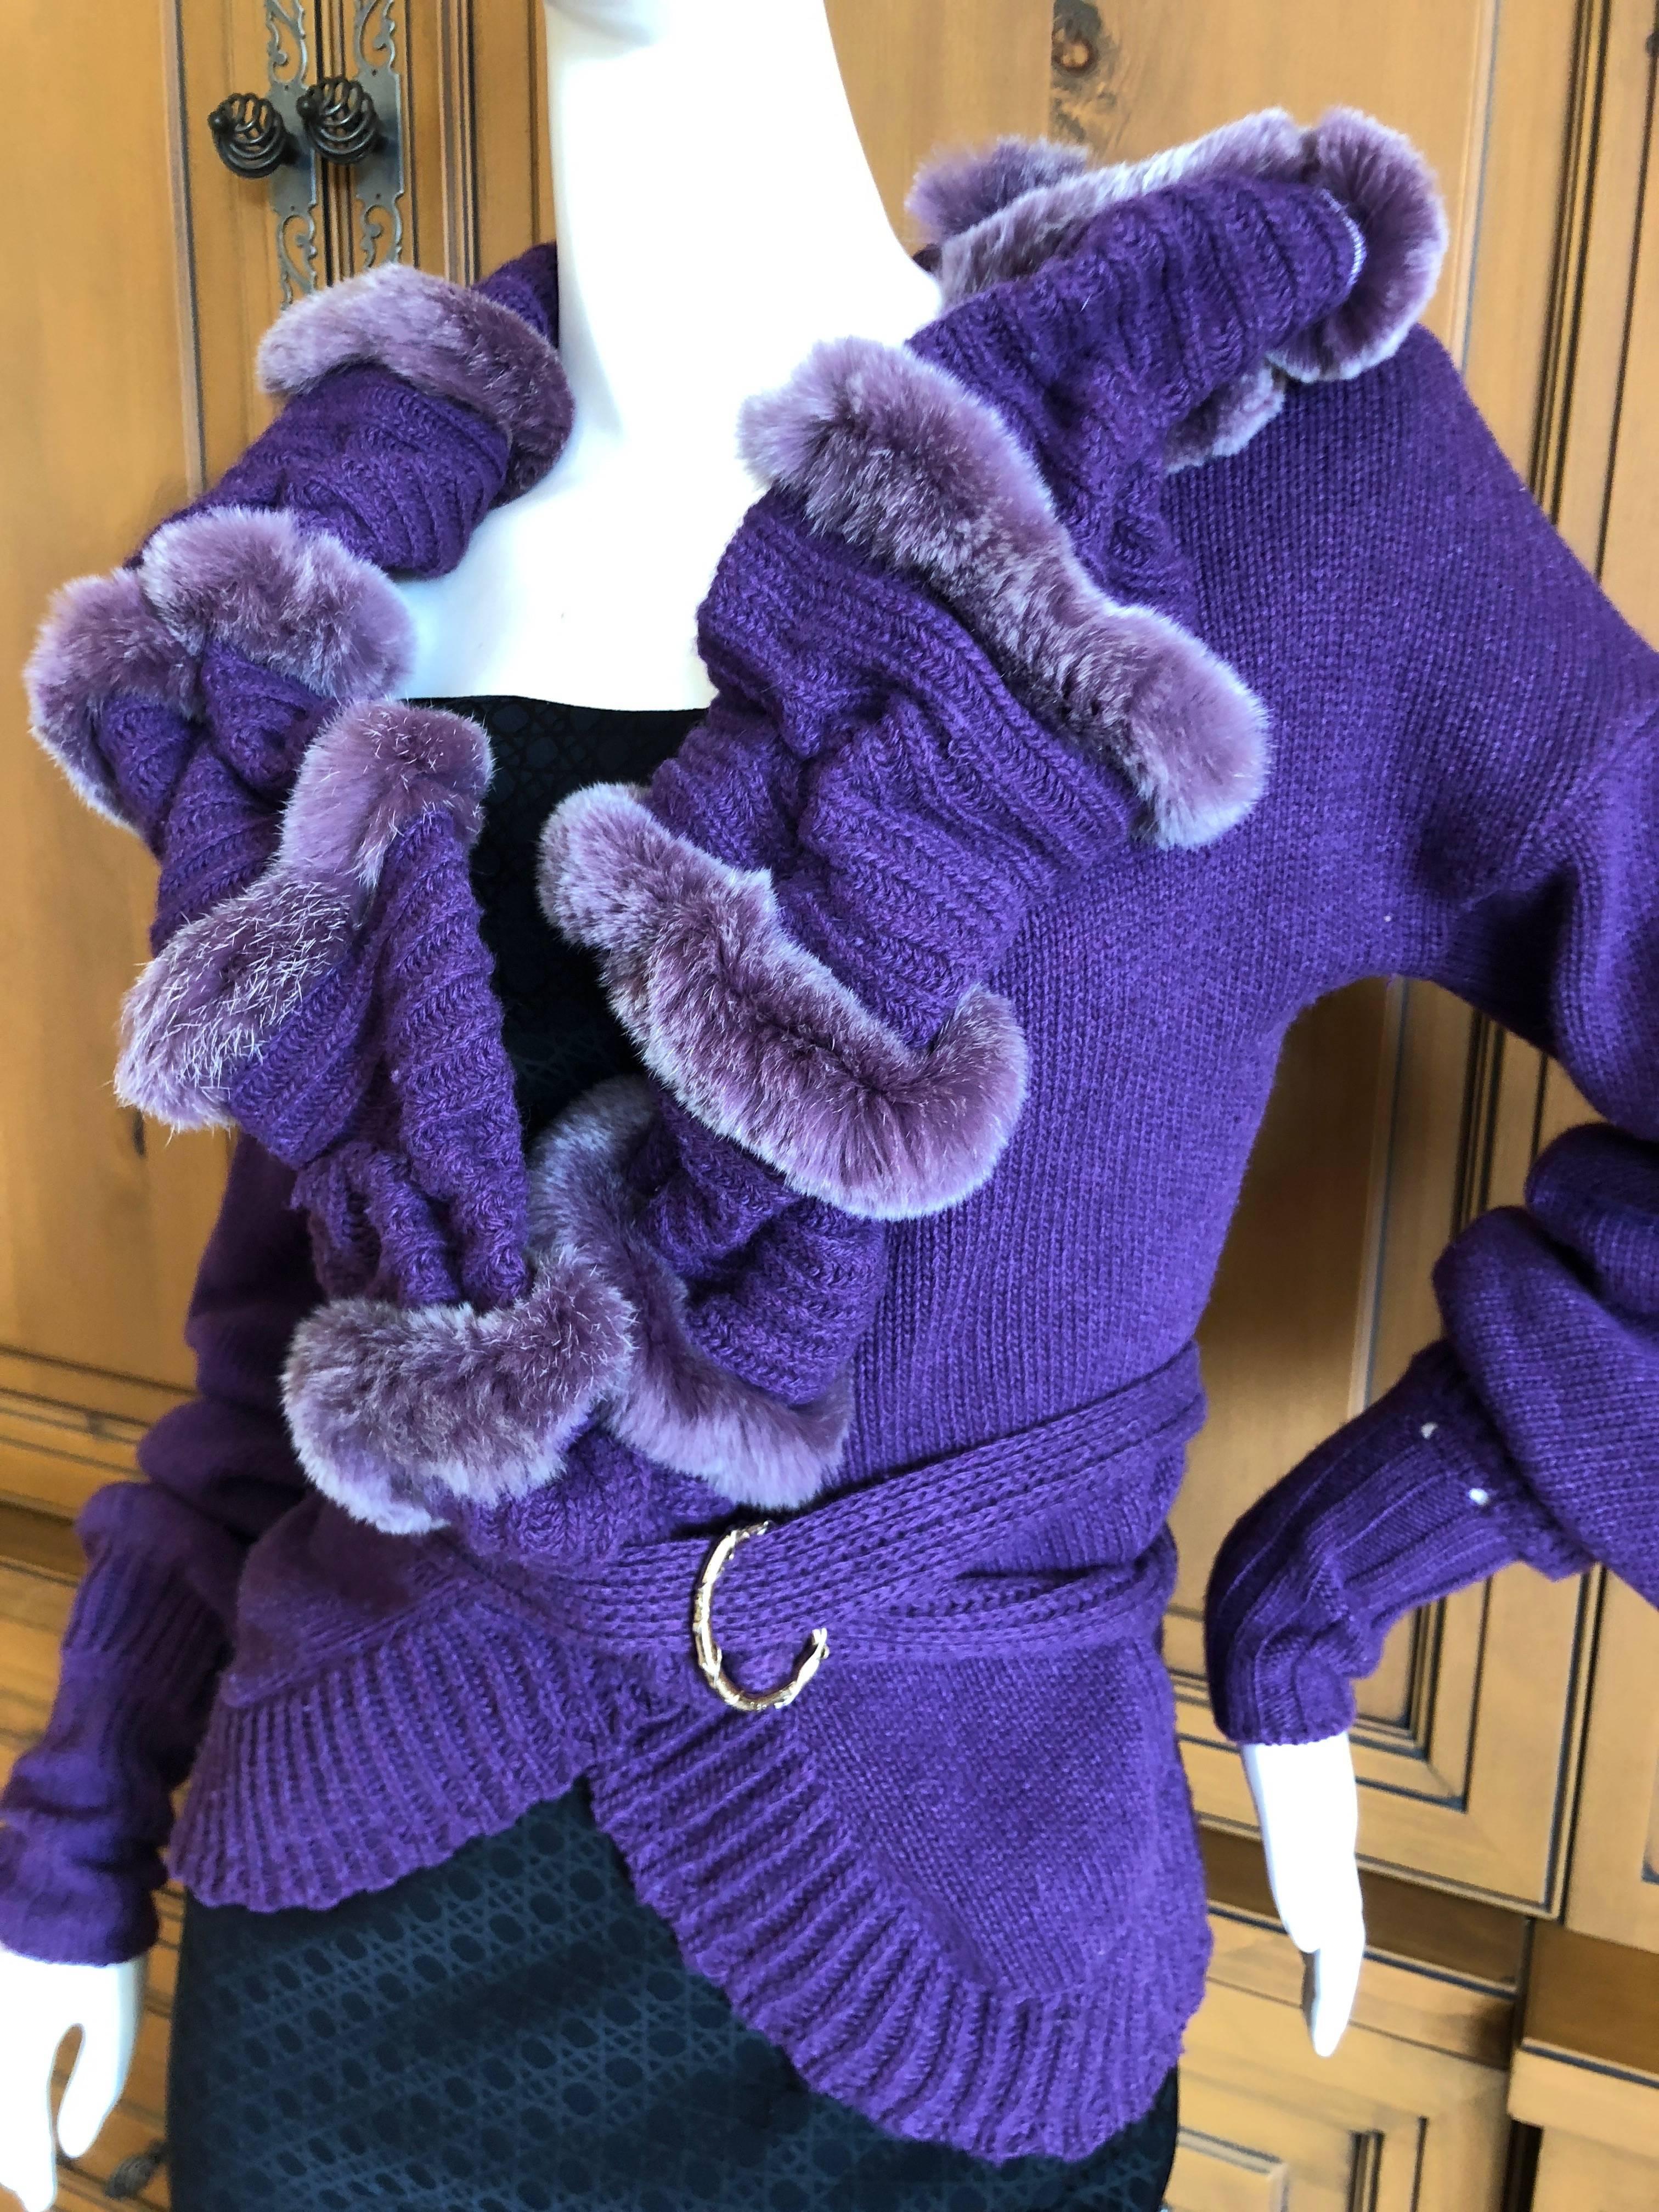 Just Cavalli Luxurious Purple Sweater with Genuine Fur Trim In Excellent Condition For Sale In Cloverdale, CA